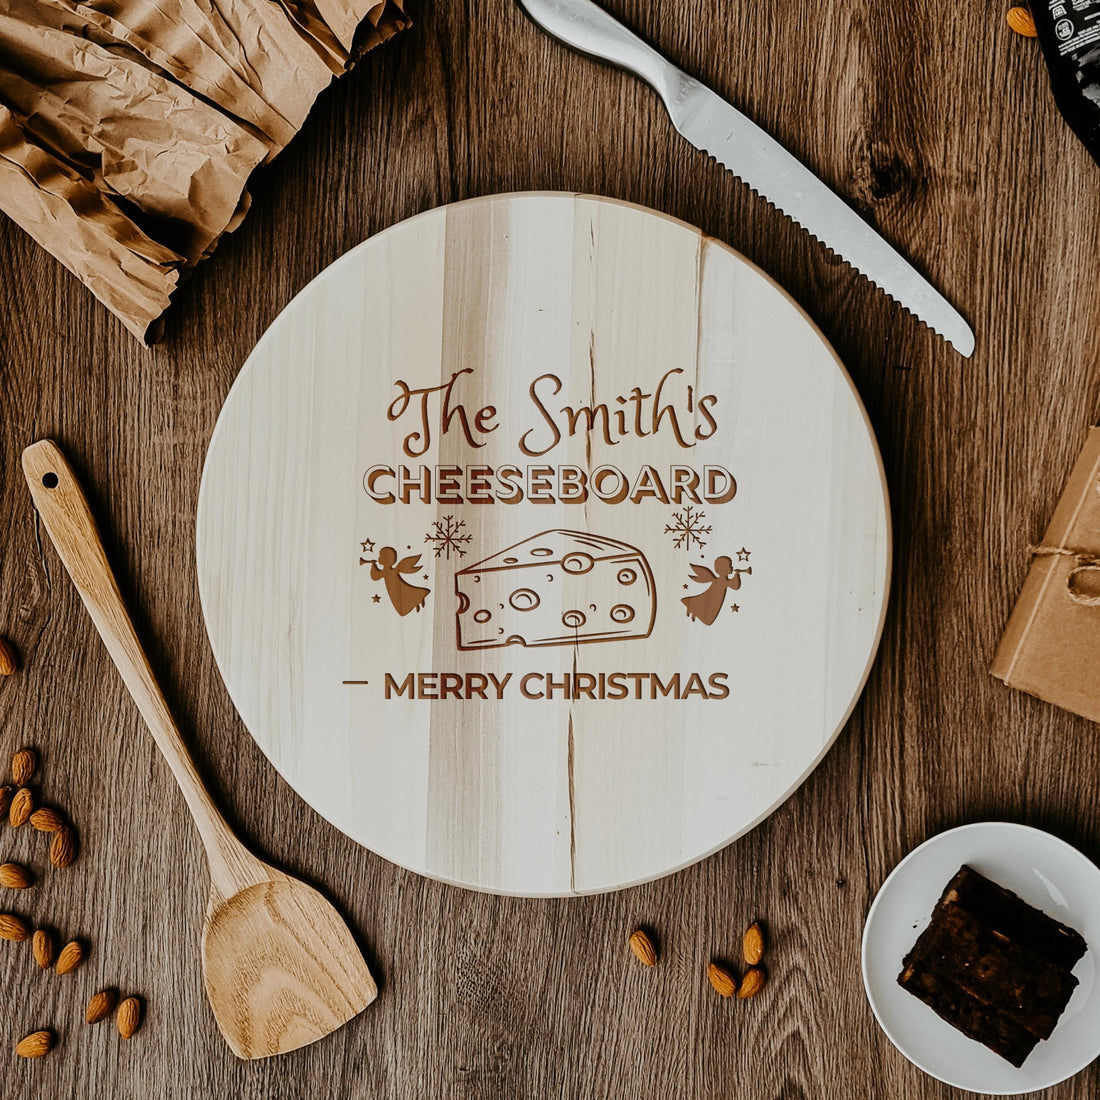 Christmas Custom Engraved Solid Wood Lazy Susan Tray, Cheese Charcuterie Serving Round Spin Board, Personalised Organiser Xmas New Year Housewarming Gift